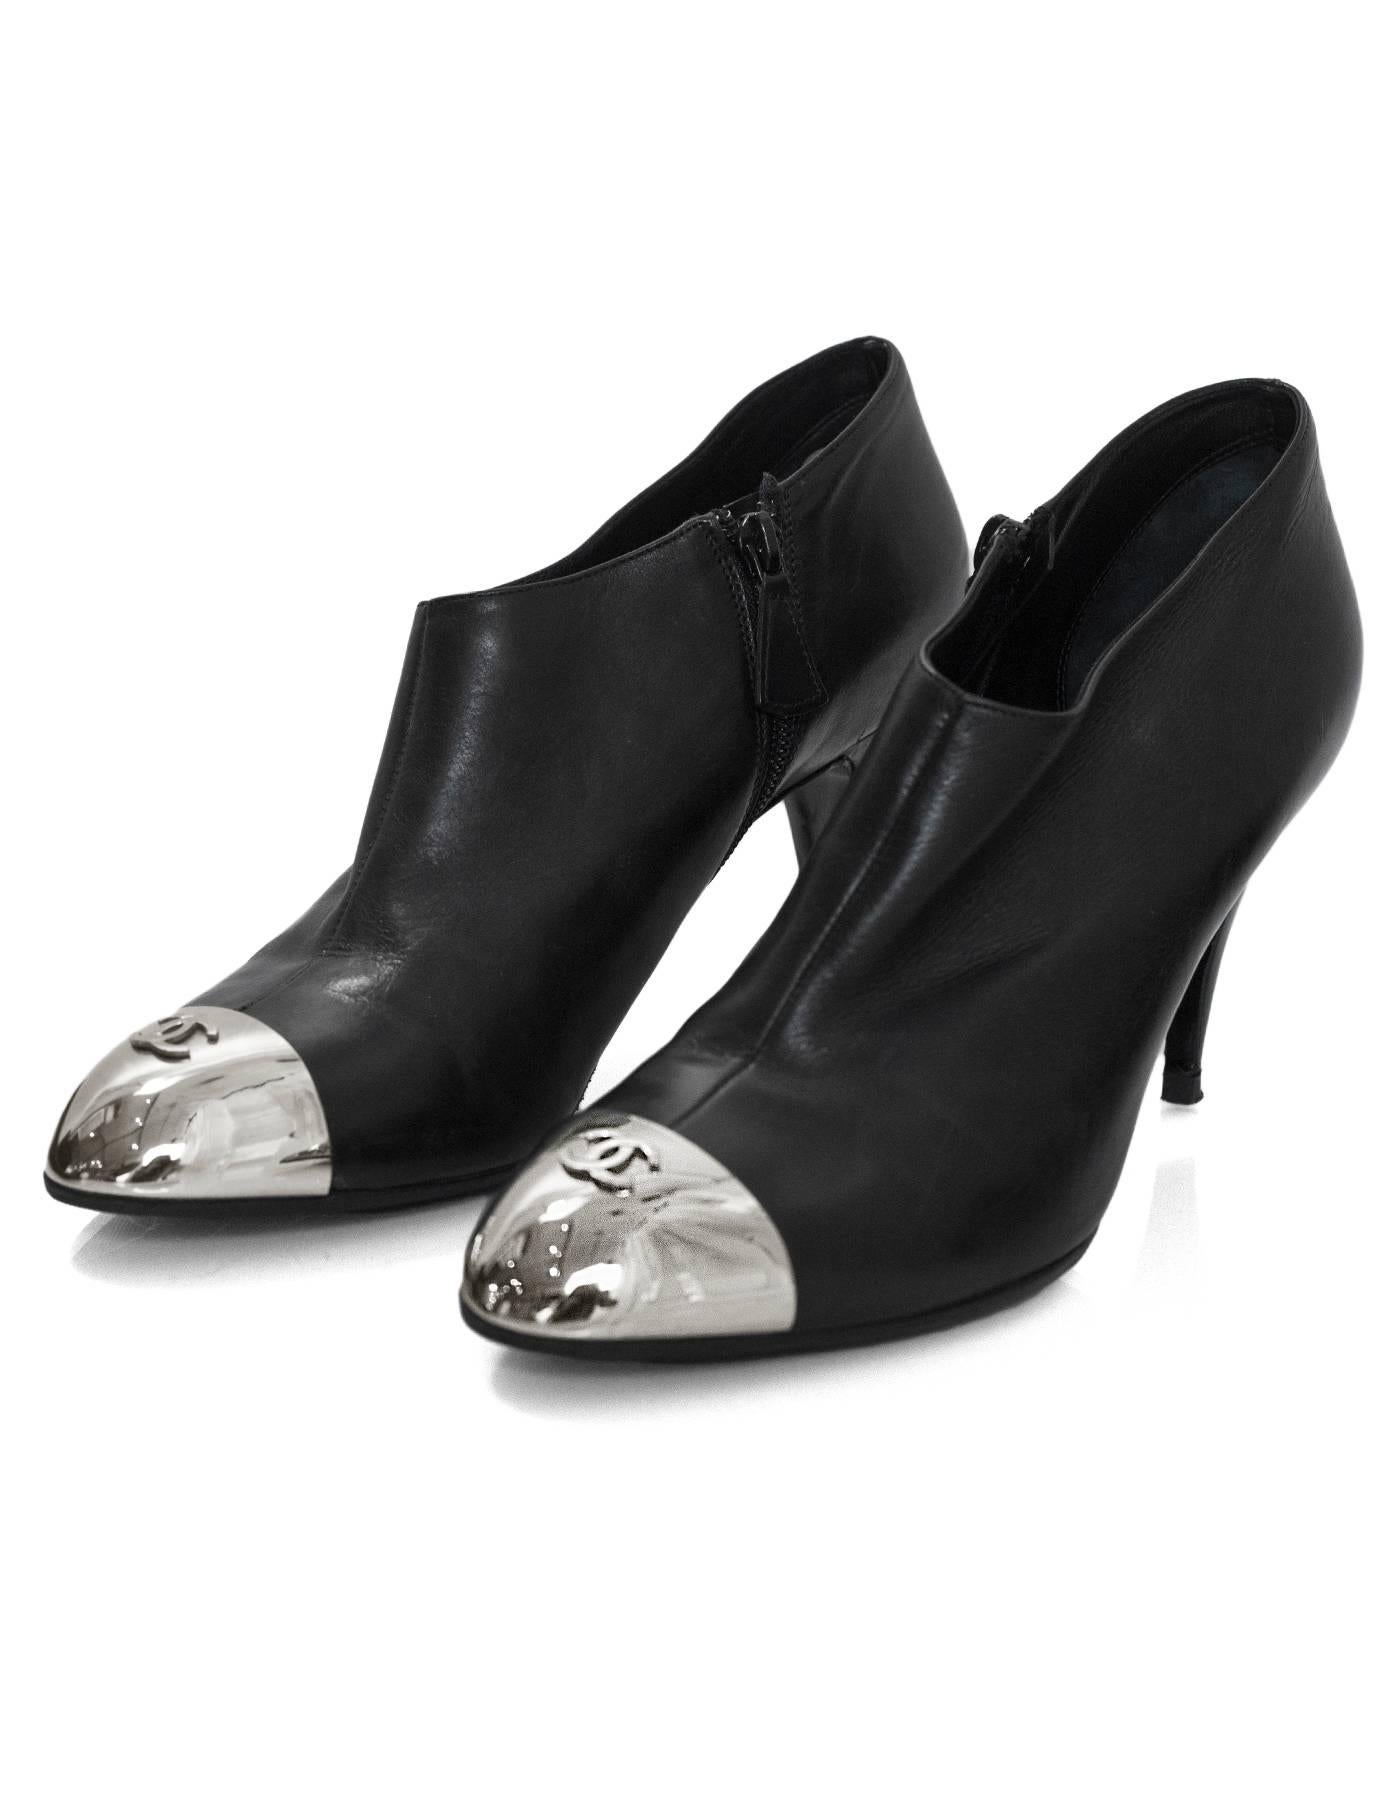 Chanel Black Leather & Silver Cap-Toe Booties Sz 40

Made In: Italy
Color: Black, silver
Materials: Leather, metal
Closure/Opening: Side zip
Sole Stamp: CC Made in Italy 40
Overall Condition: Excellent pre-owned condition with the exception of being